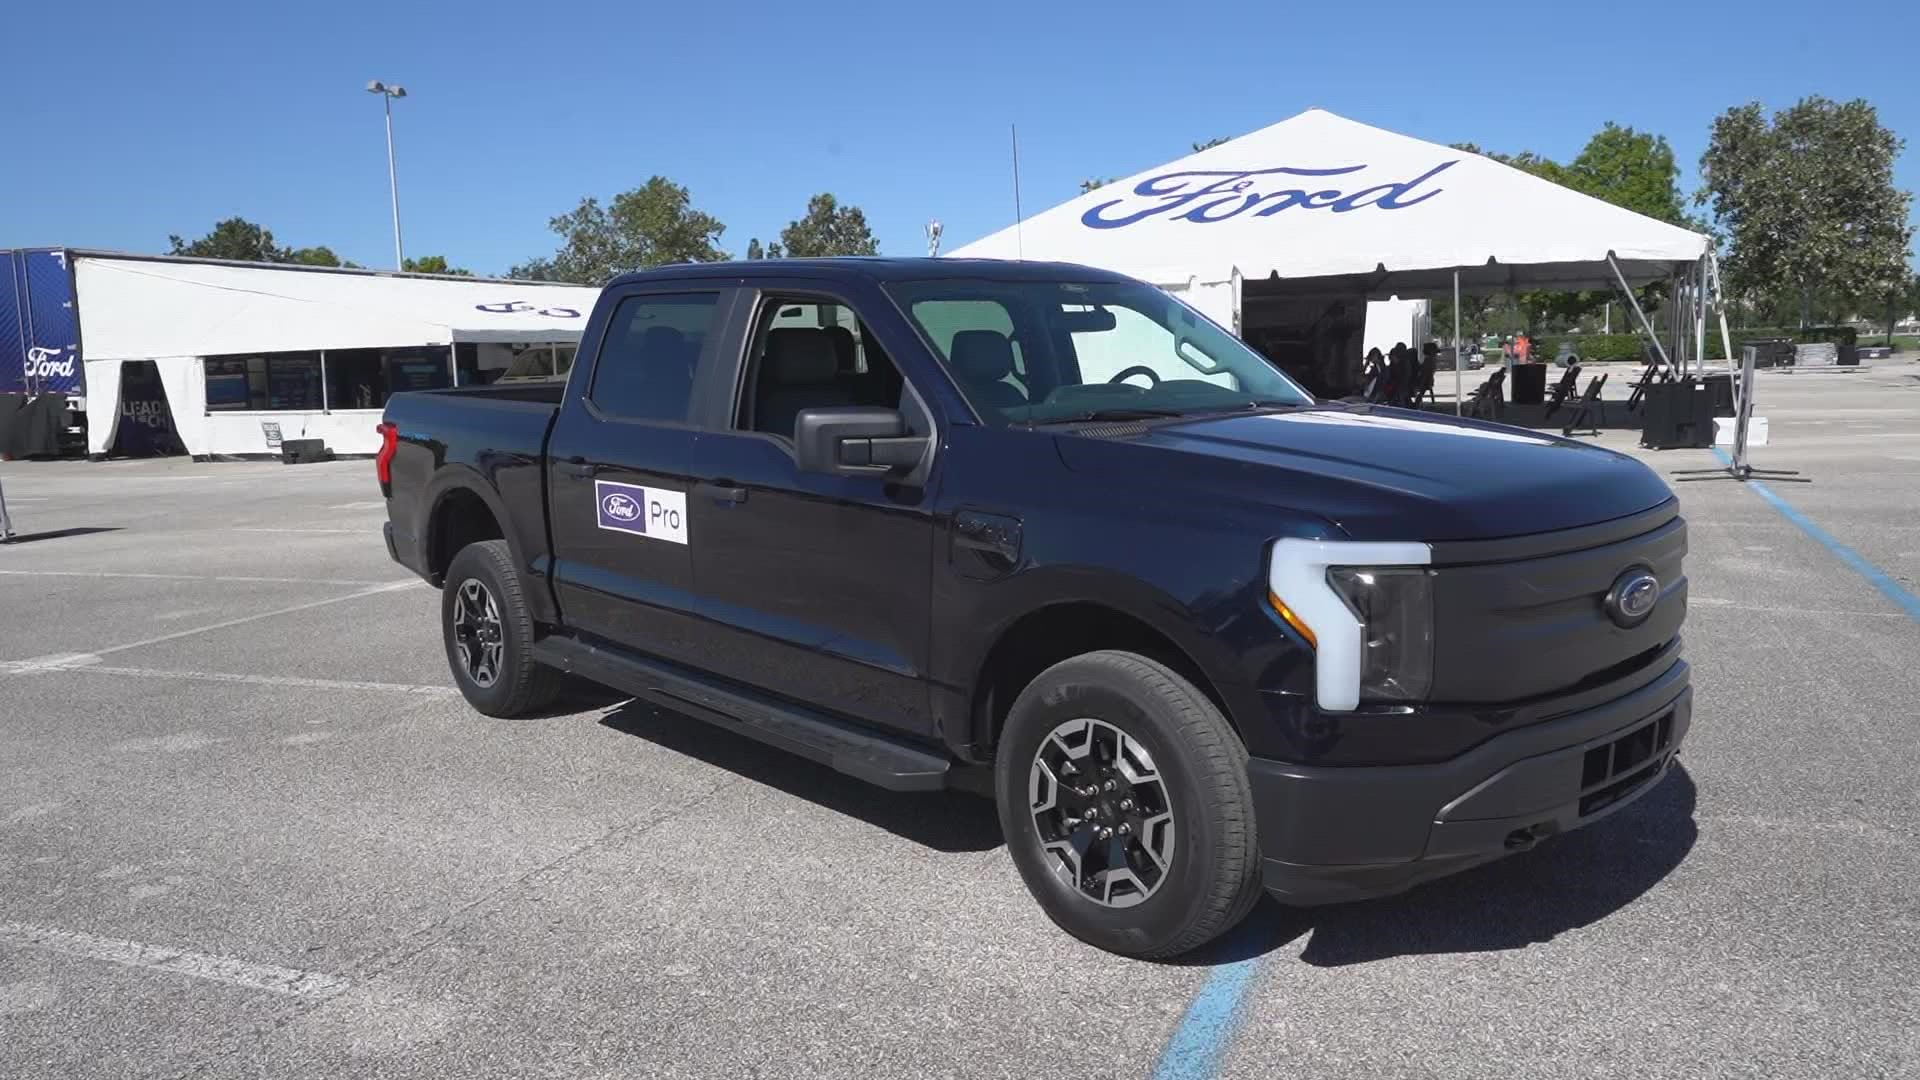 Dubbed the most popular pickup in Texas, Ford's F-150 is getting electrified. Consumer reporter Tiffany Craig gives us a sneak peek.